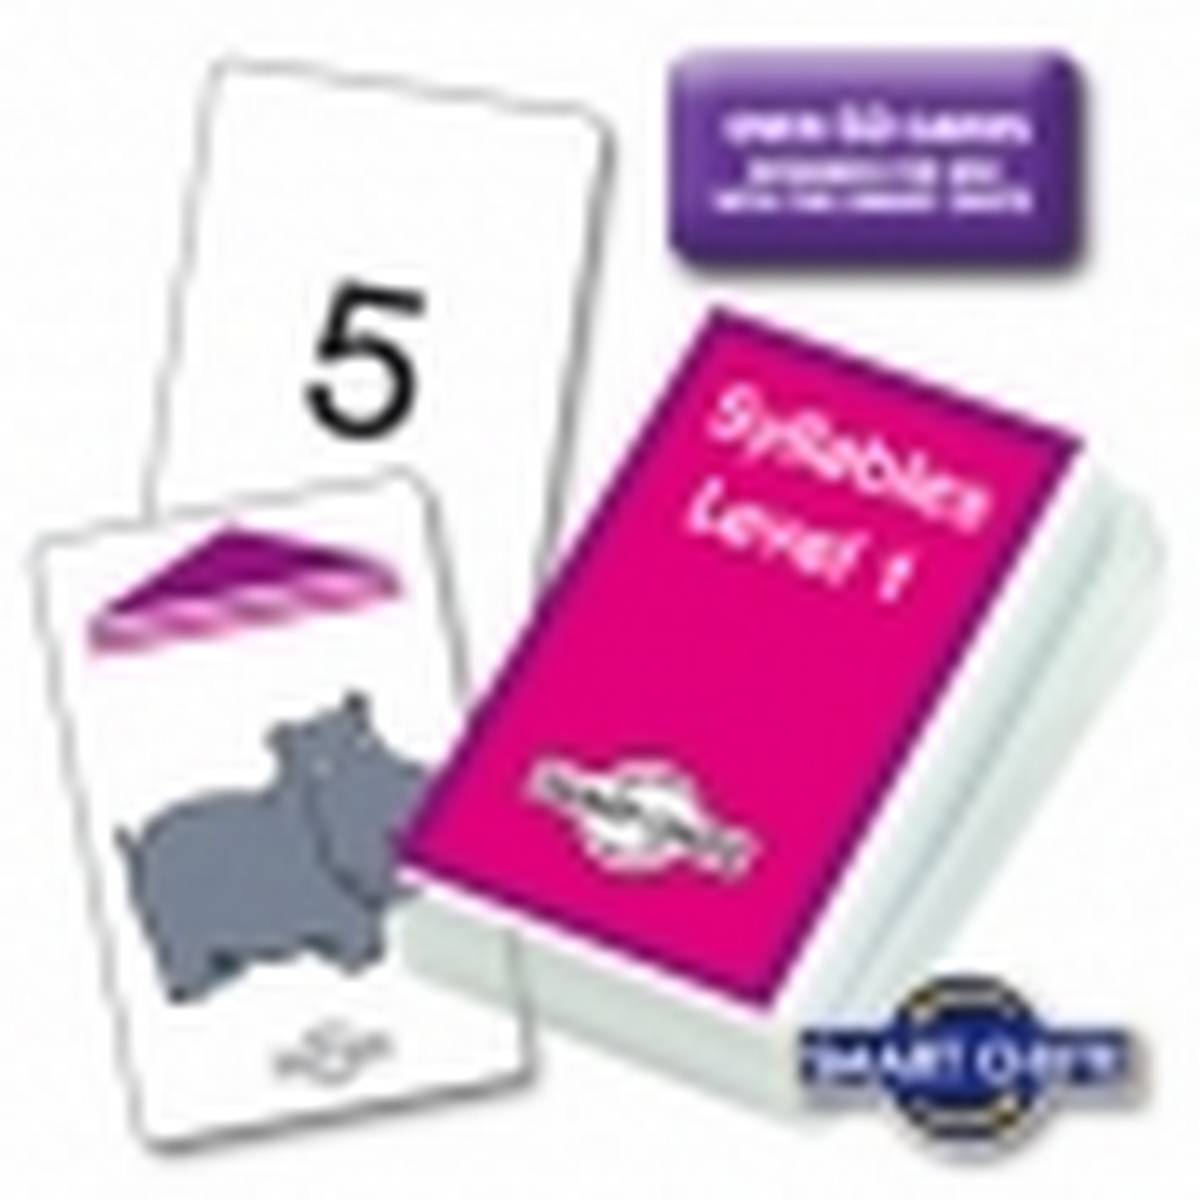 Syllables Chute Cards - Level 1